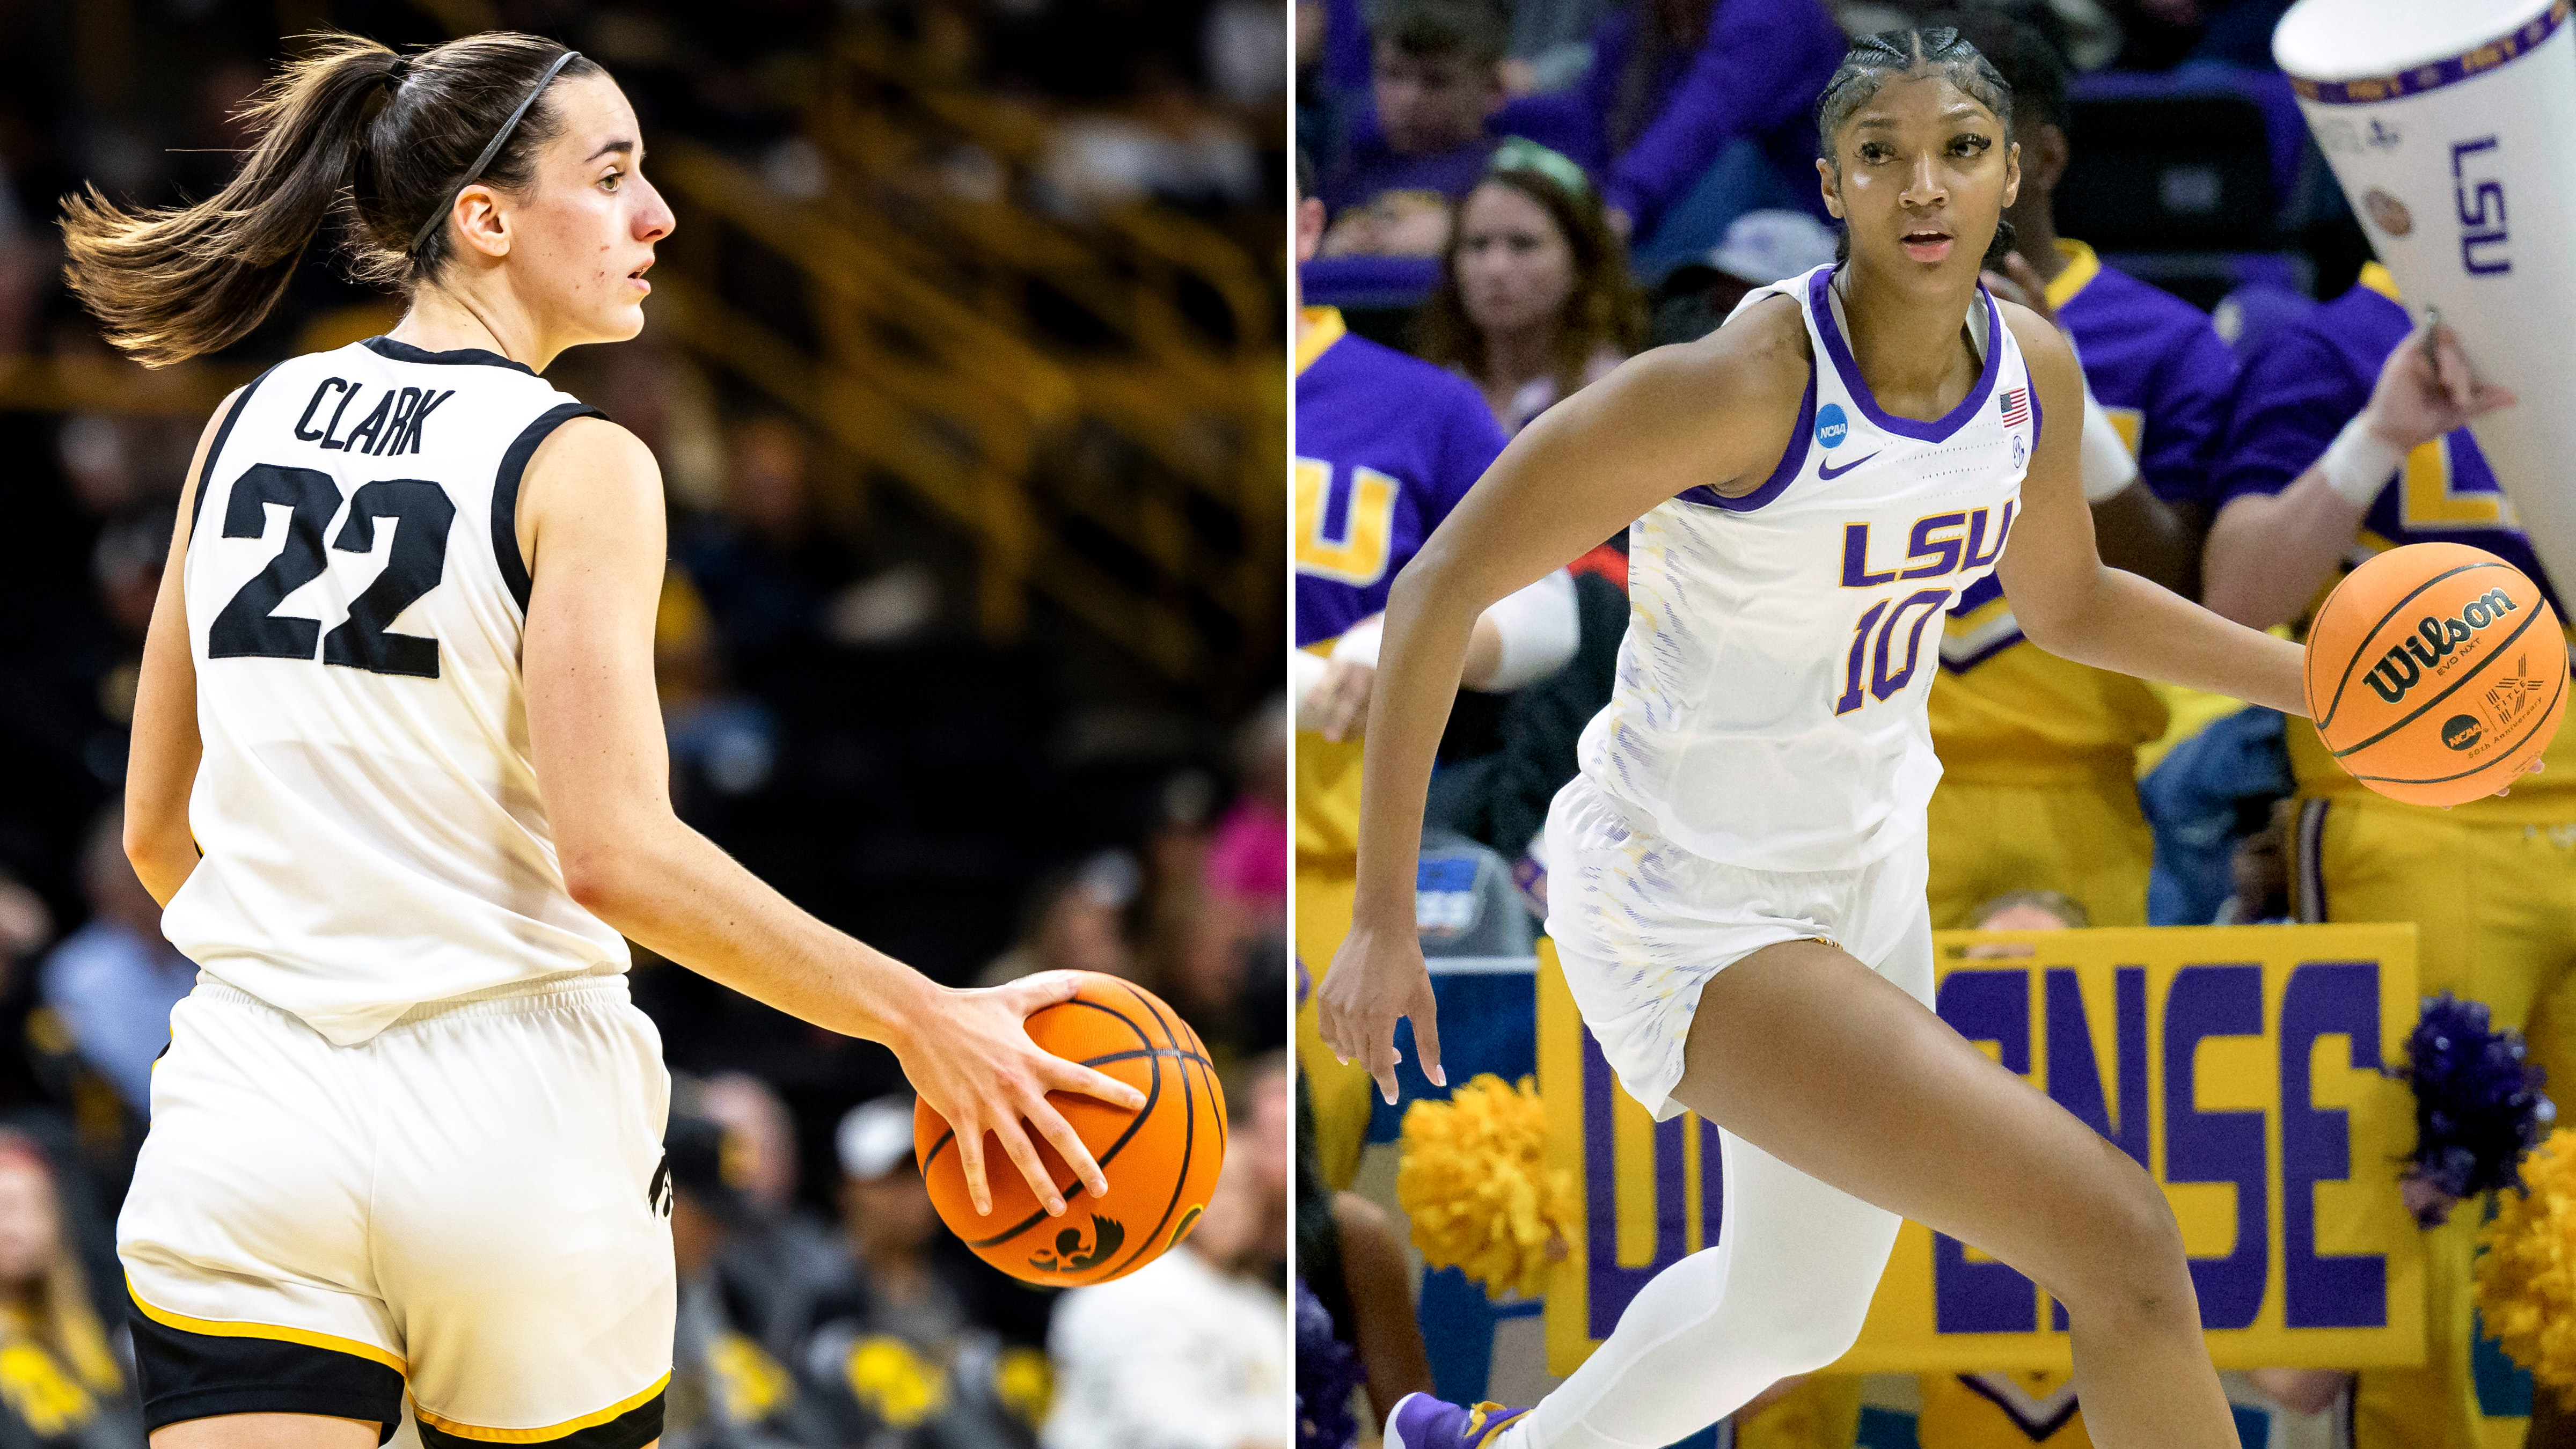 A split image of Iowa Hawkeyes player Caitlin Clark and LSU Tigers player Angel Reese in action.